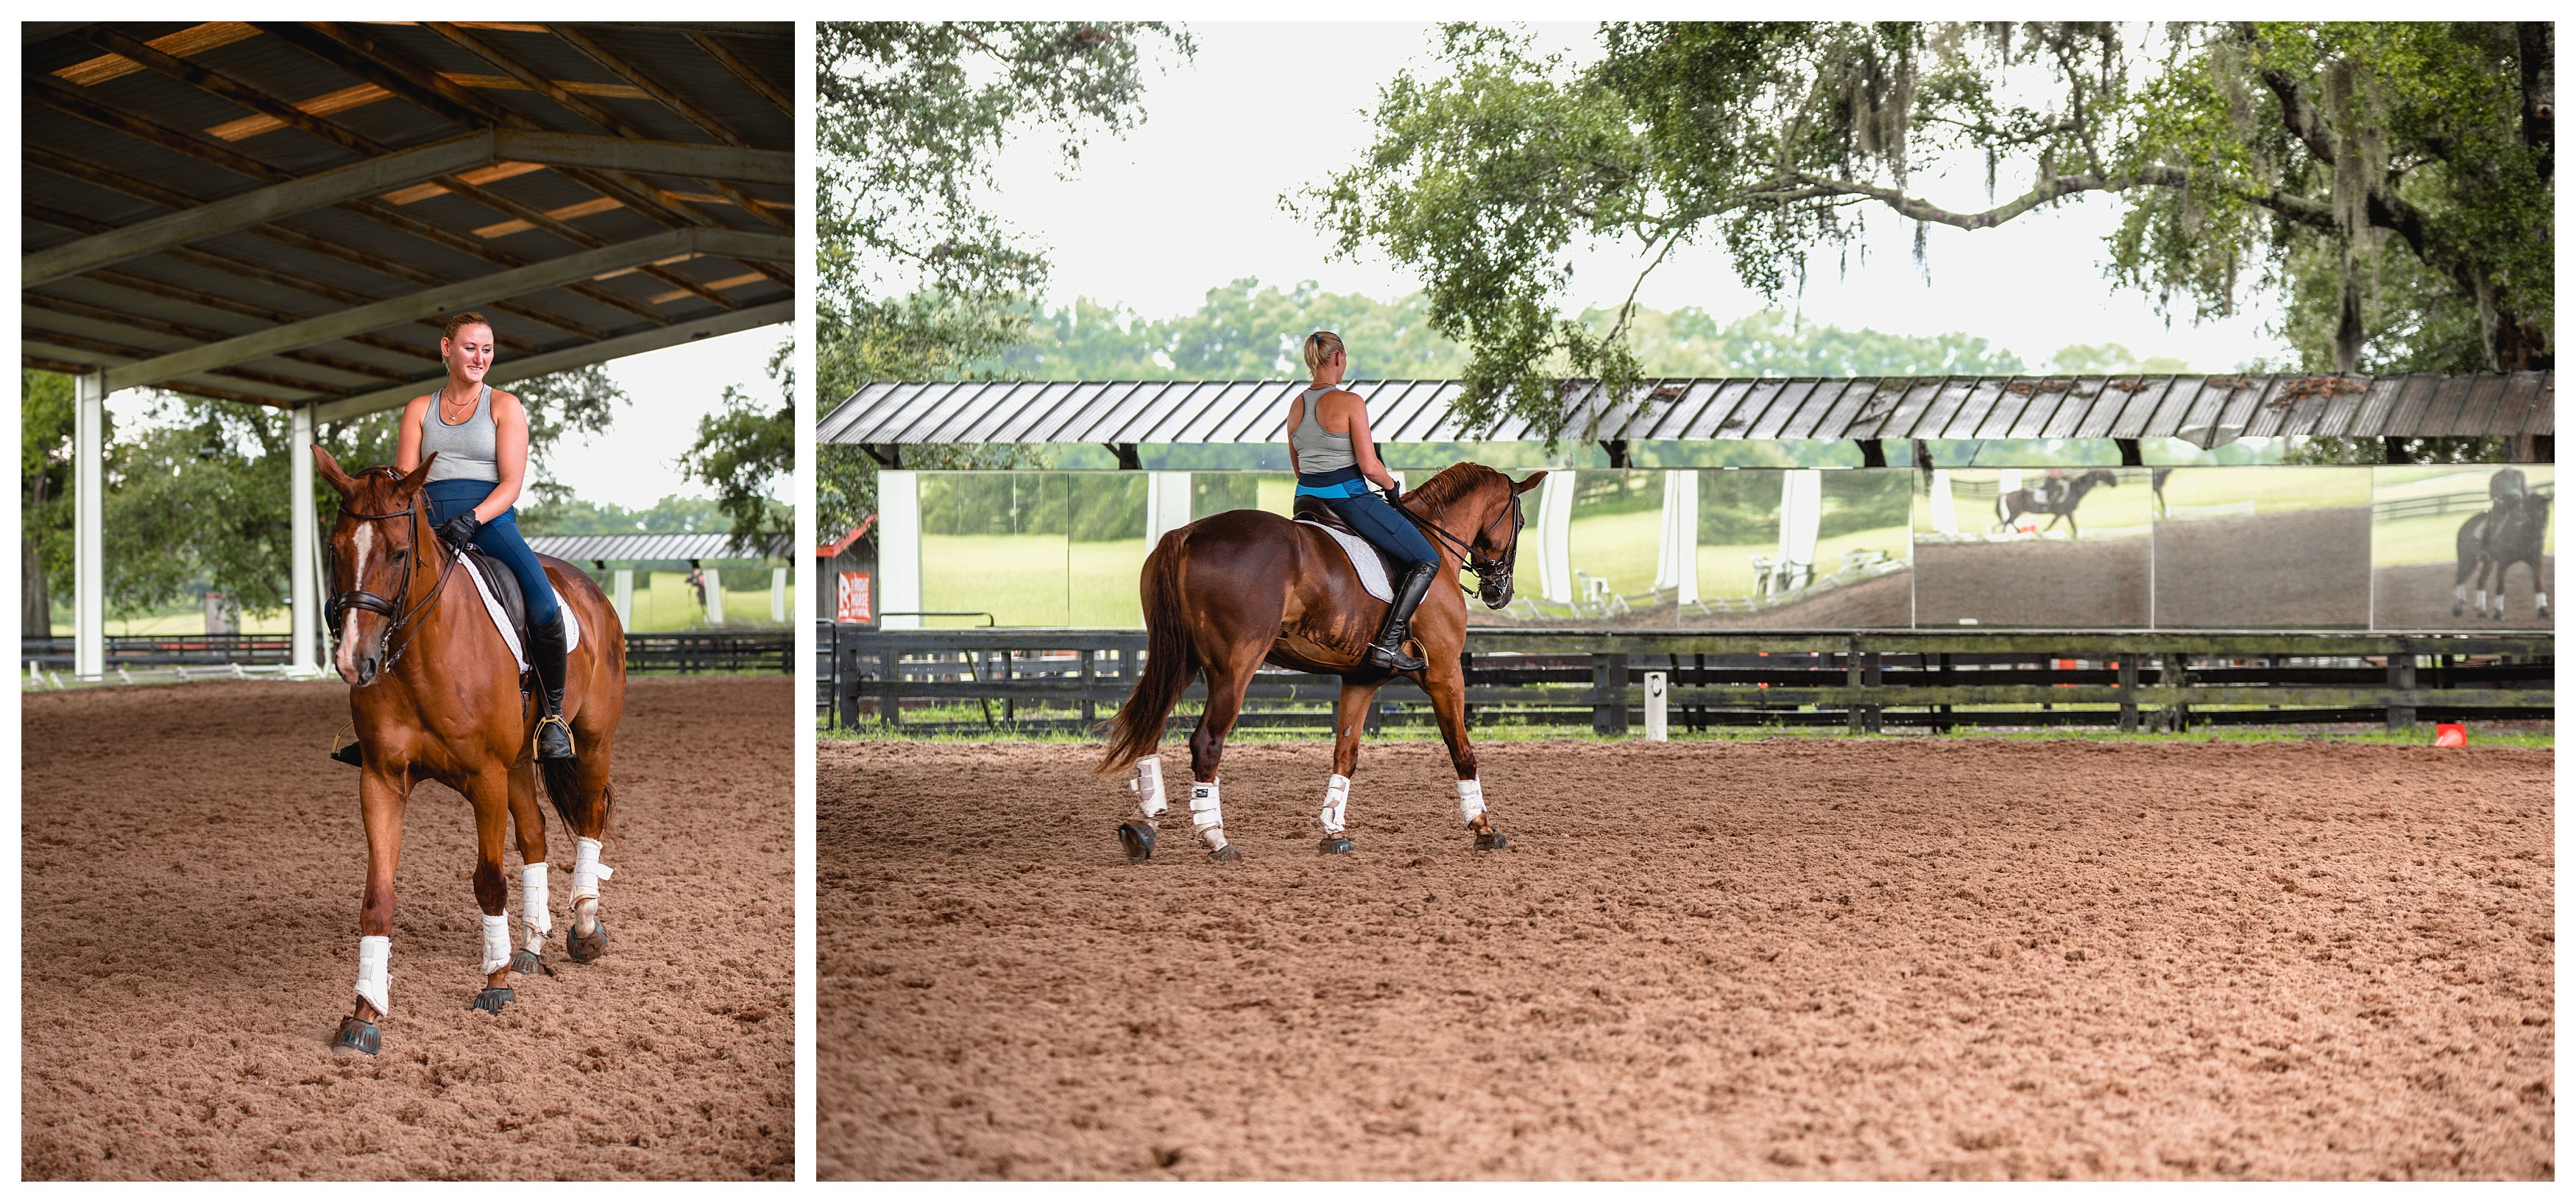 KYB Dressage, horse dressage lessons in north florida by professional trainer